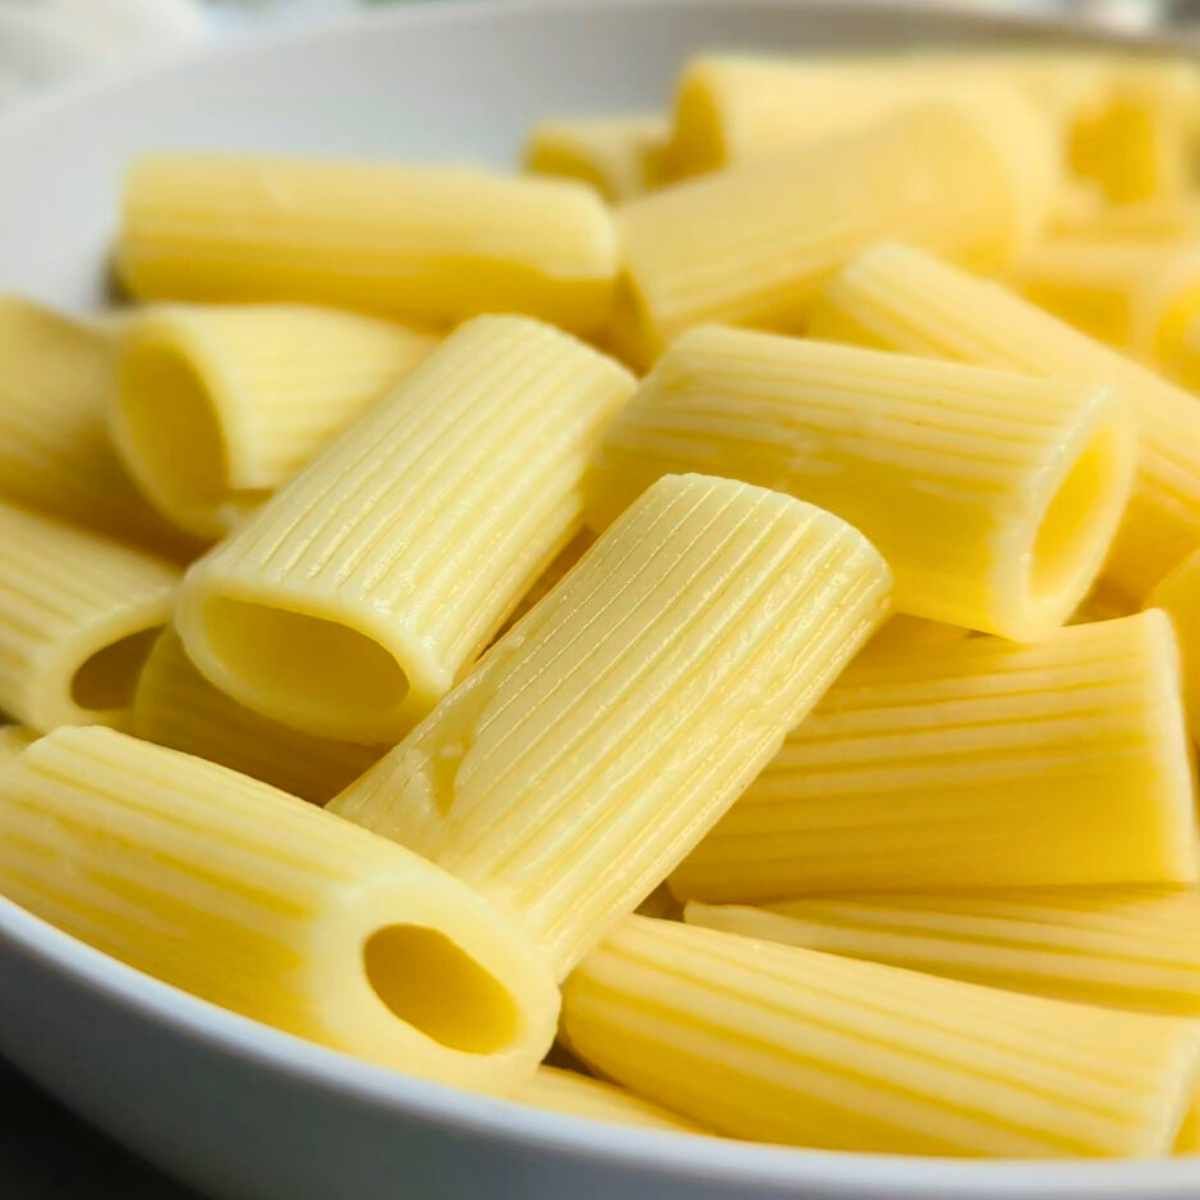 cooked rigatoni noodles in a bowl ready for sauce.